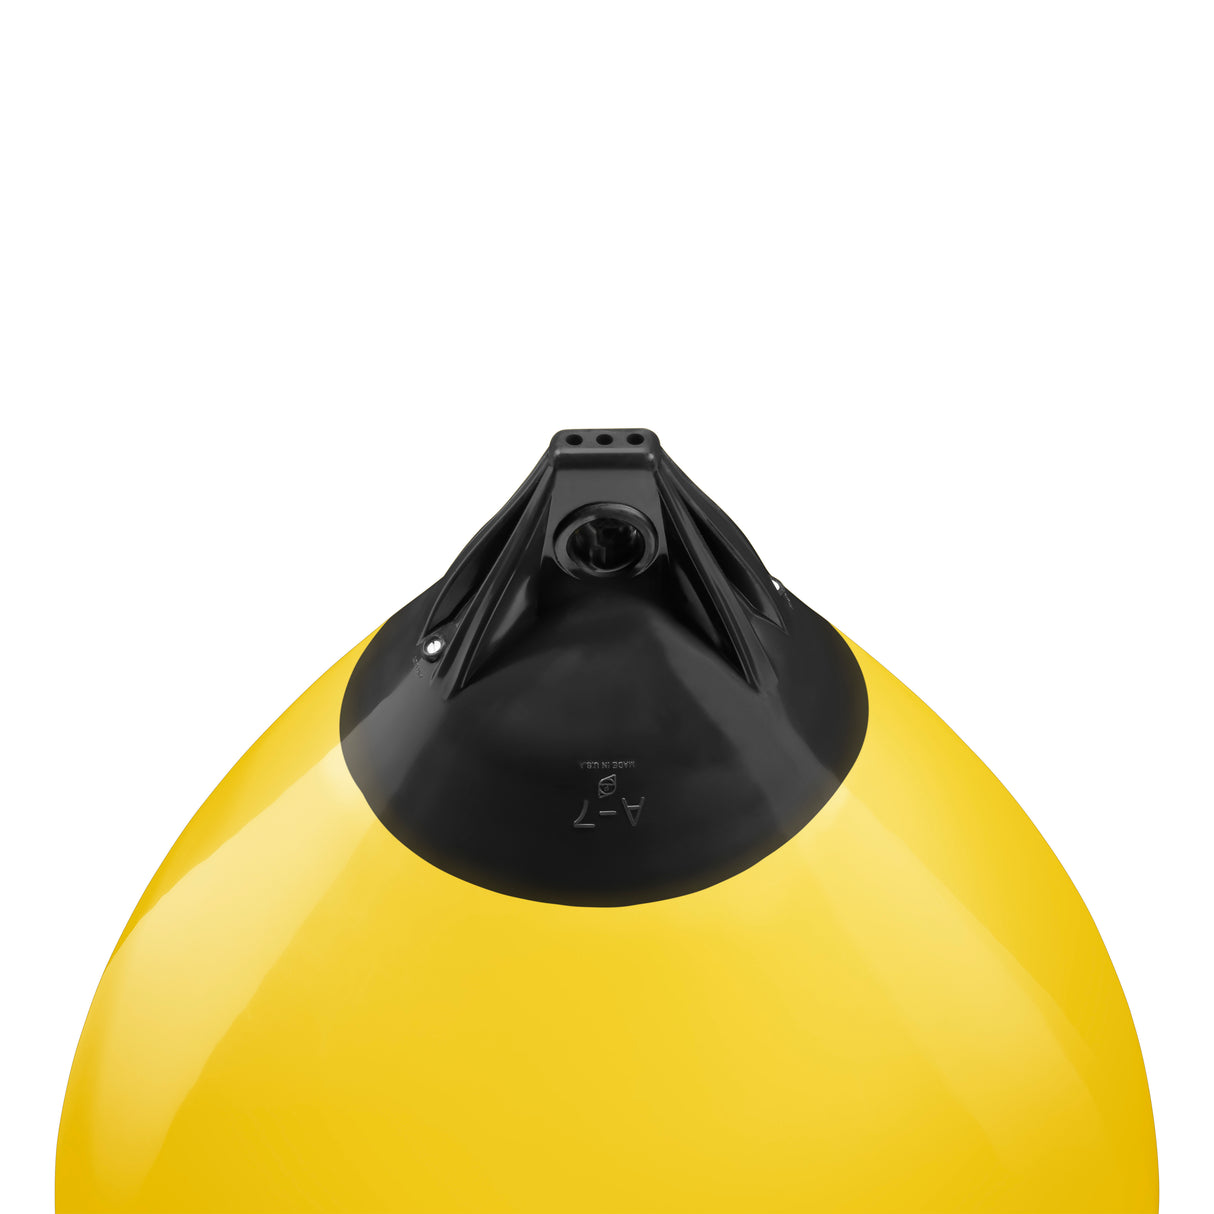 Yellow buoy with Black-Top, Polyform A-7 angled shot